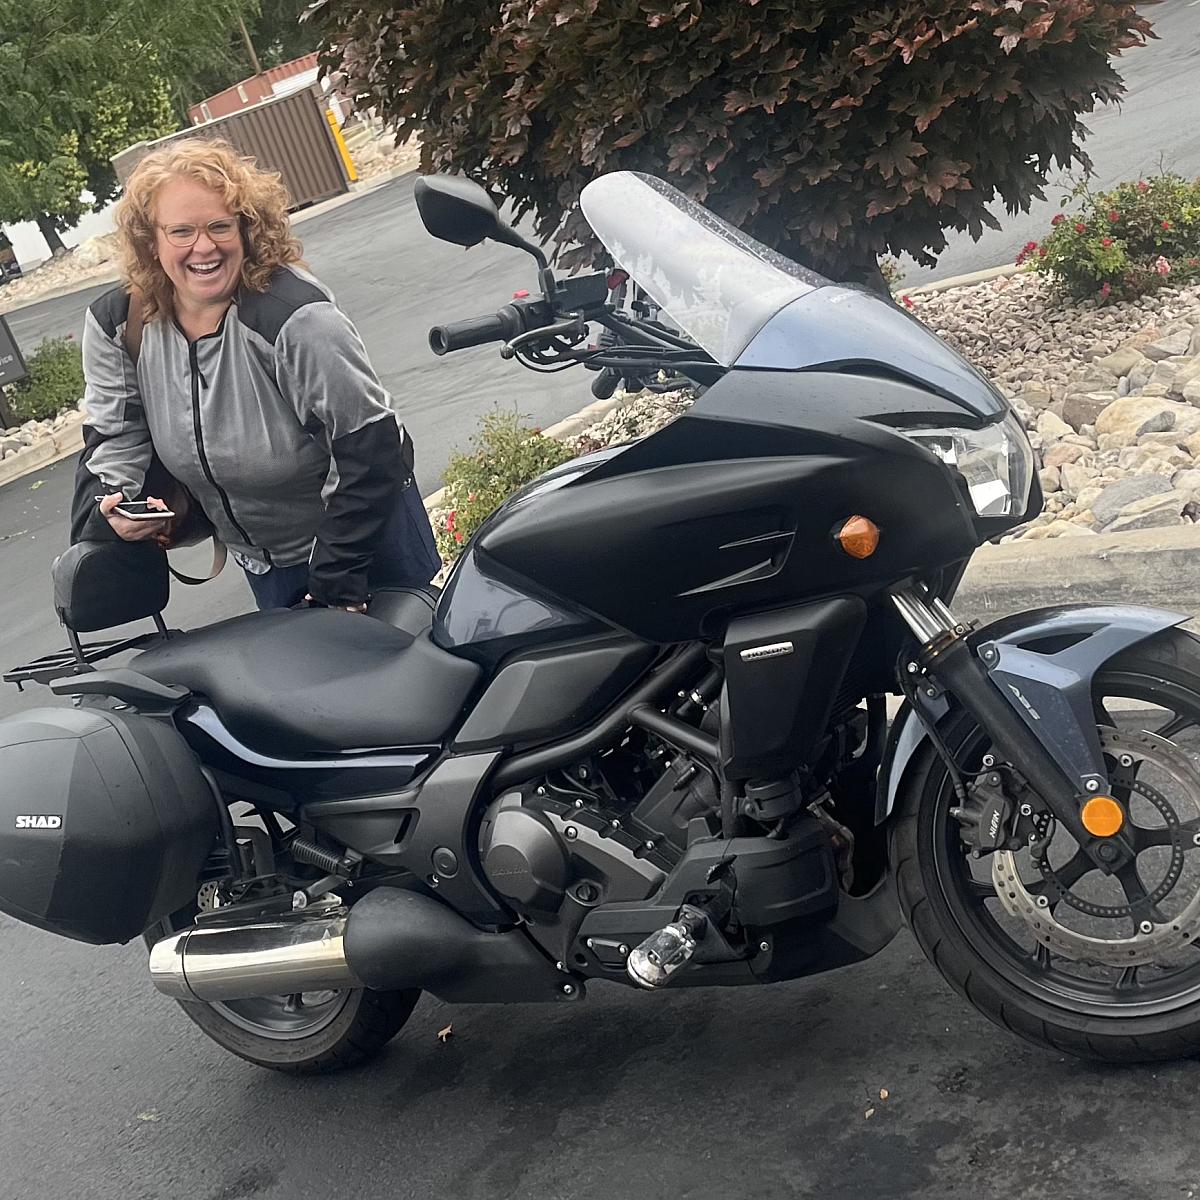 Mary Brickey stands behind her black motorcycle